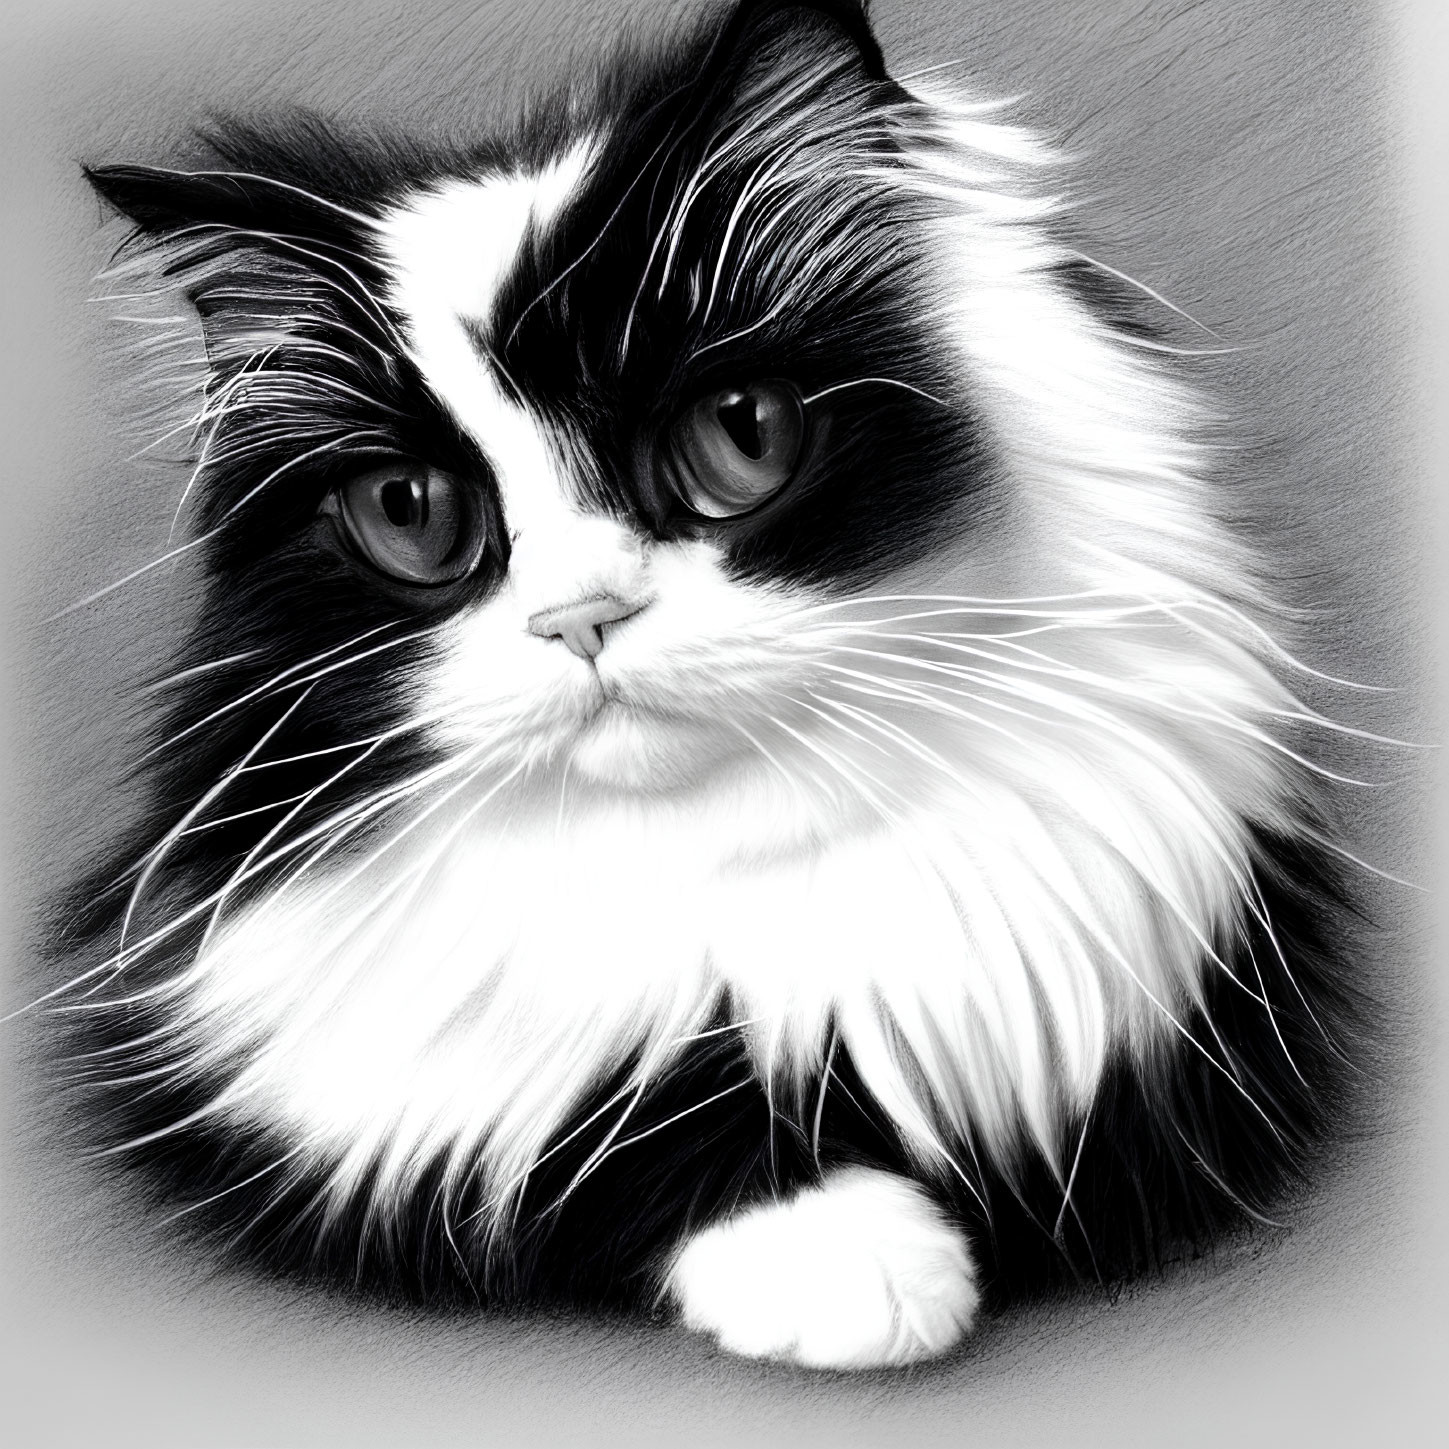 Monochrome digital drawing of fluffy Persian cat with black and white fur